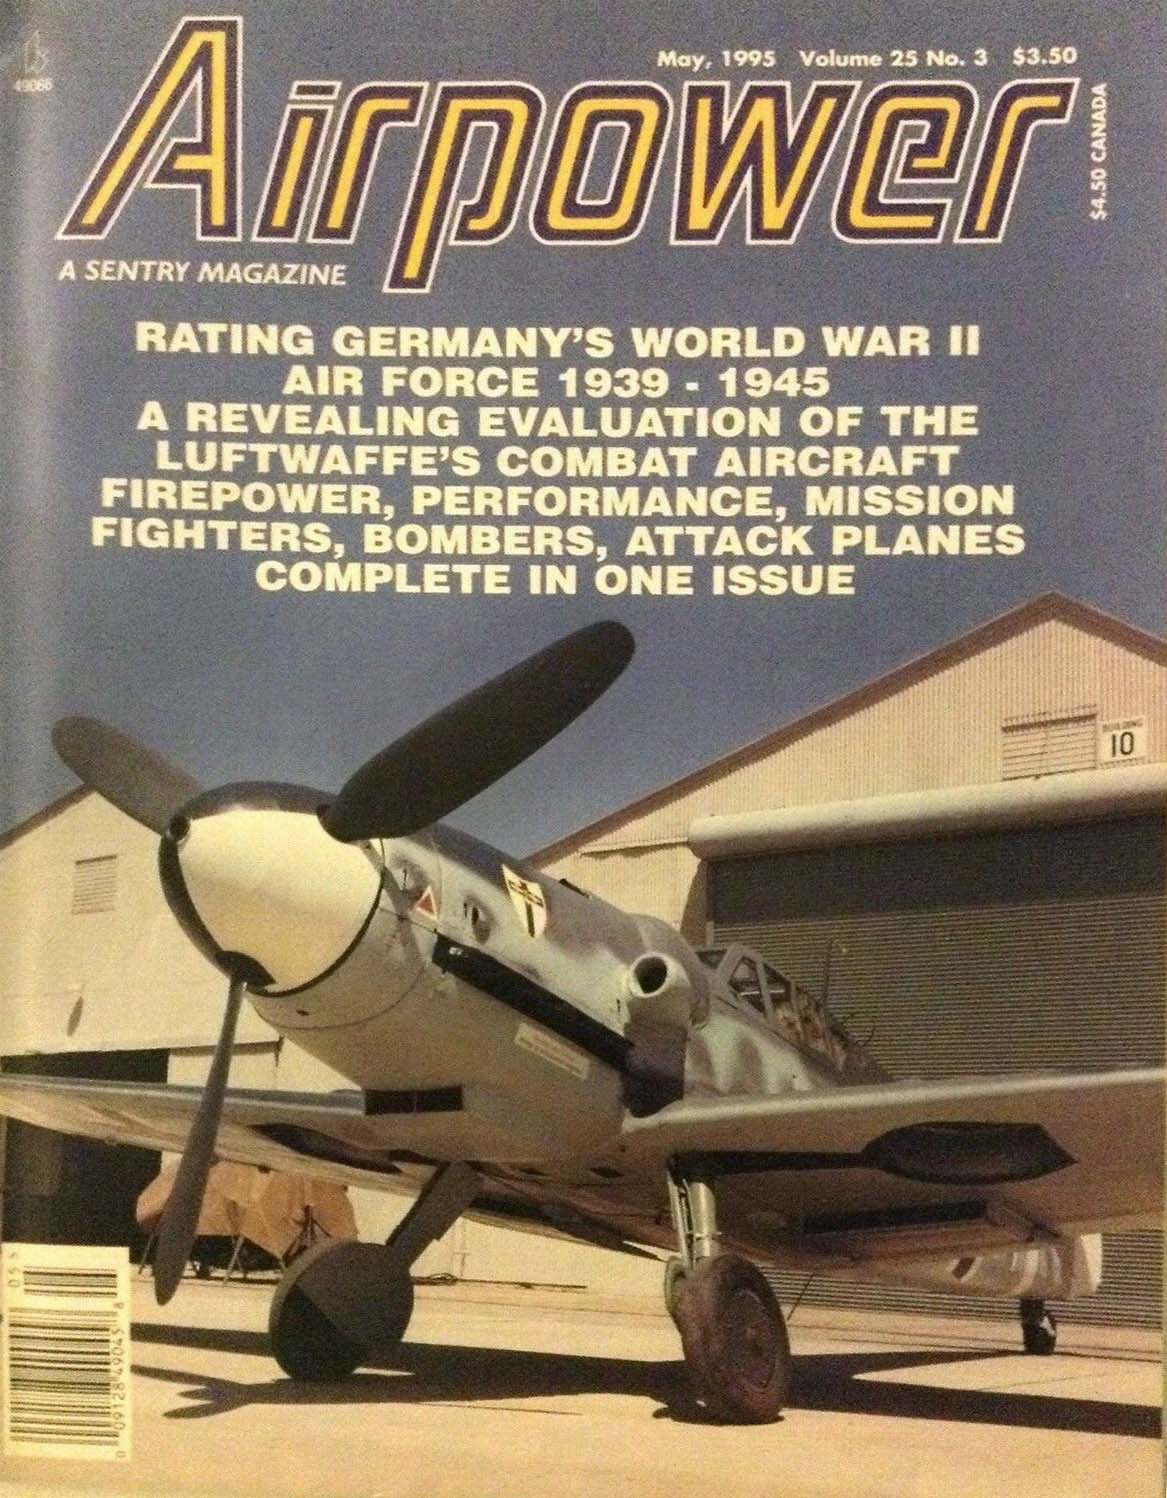 Air Power May 1995, Air Power May 1995 A Sentry Magazine Back Issue Published for military aviation, military strategy for aerial warfare. Rating Germany's World War II Air Force 1939 - 1945., Rating Germany's World War II Air Force 1939 - 1945